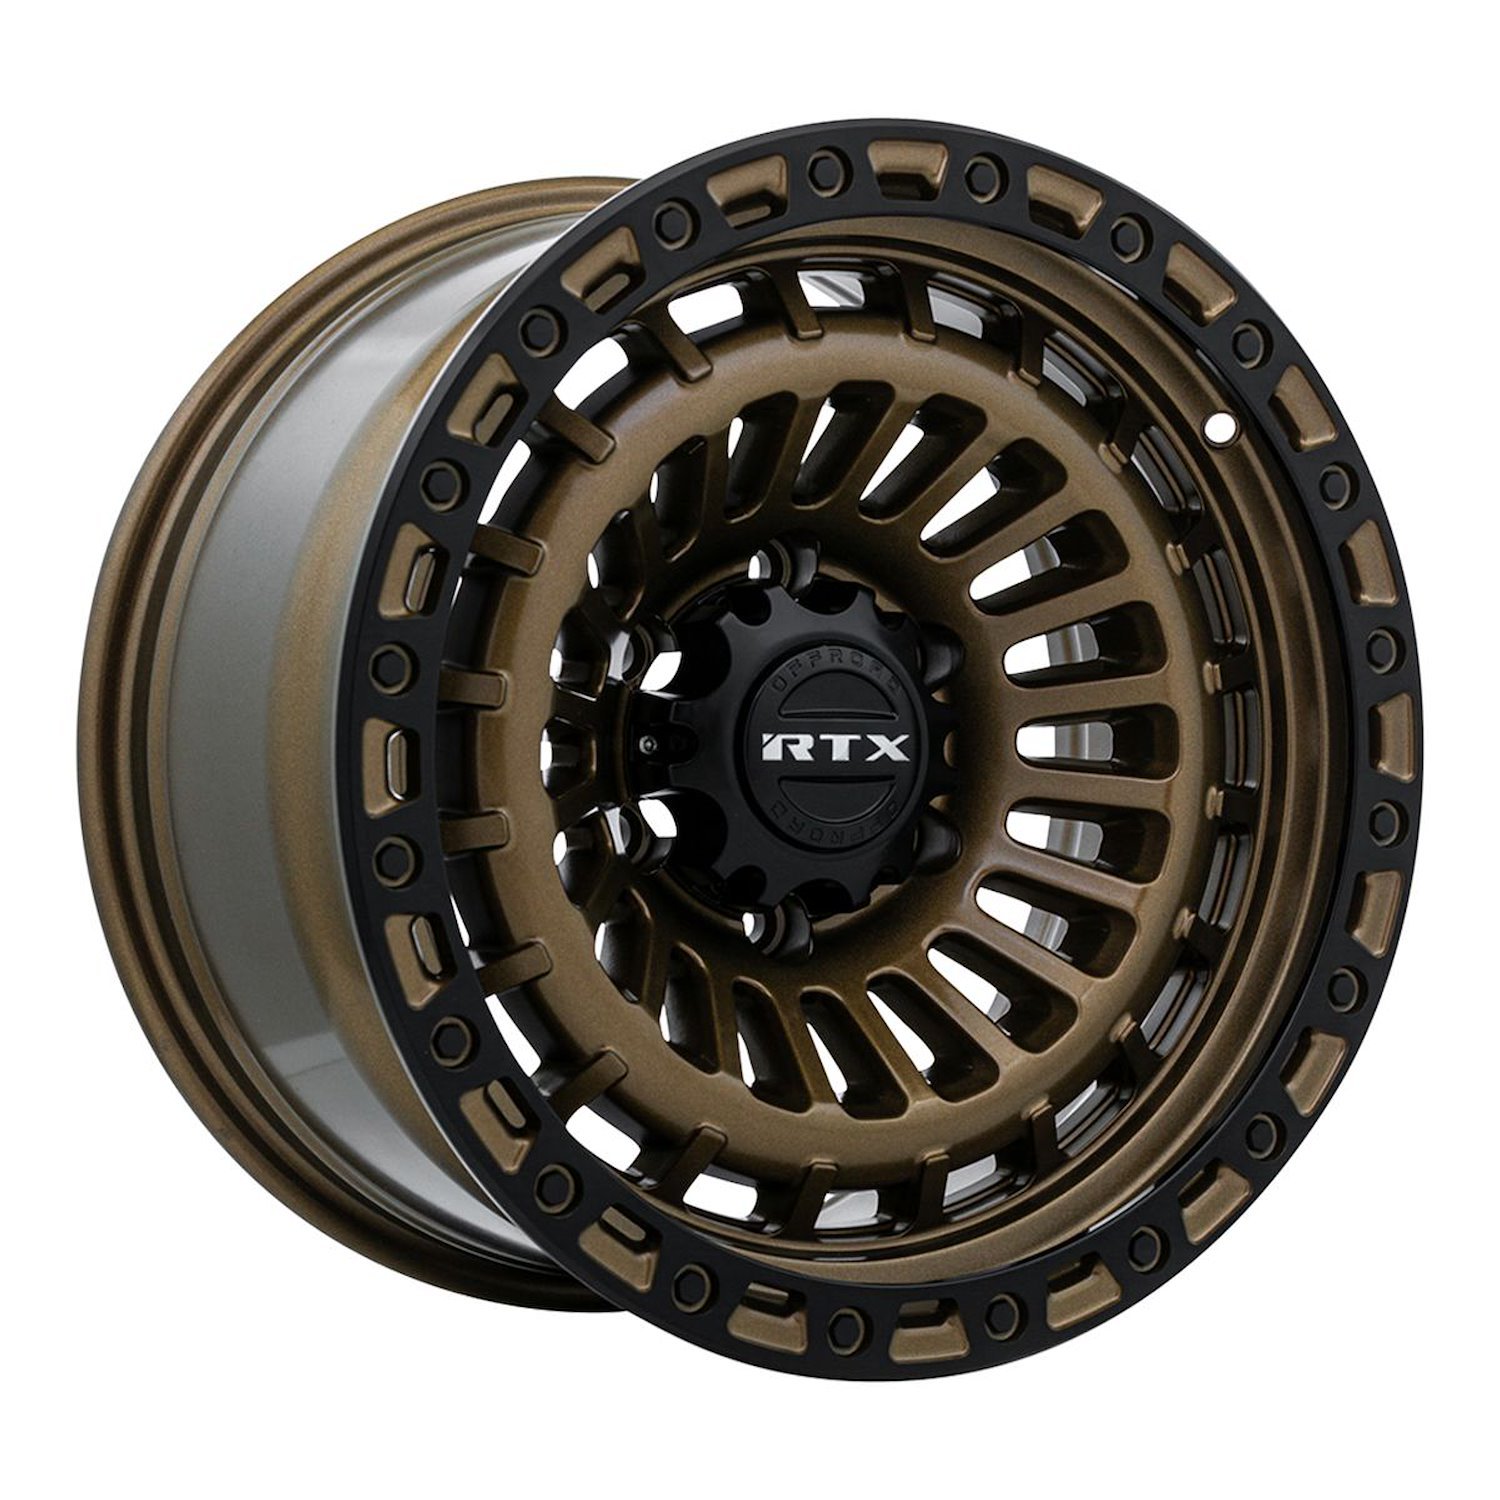 083100 Off-Road Series Moab Wheel [Size: 18" x 9"] Bronze with Satin Black Lip Finish